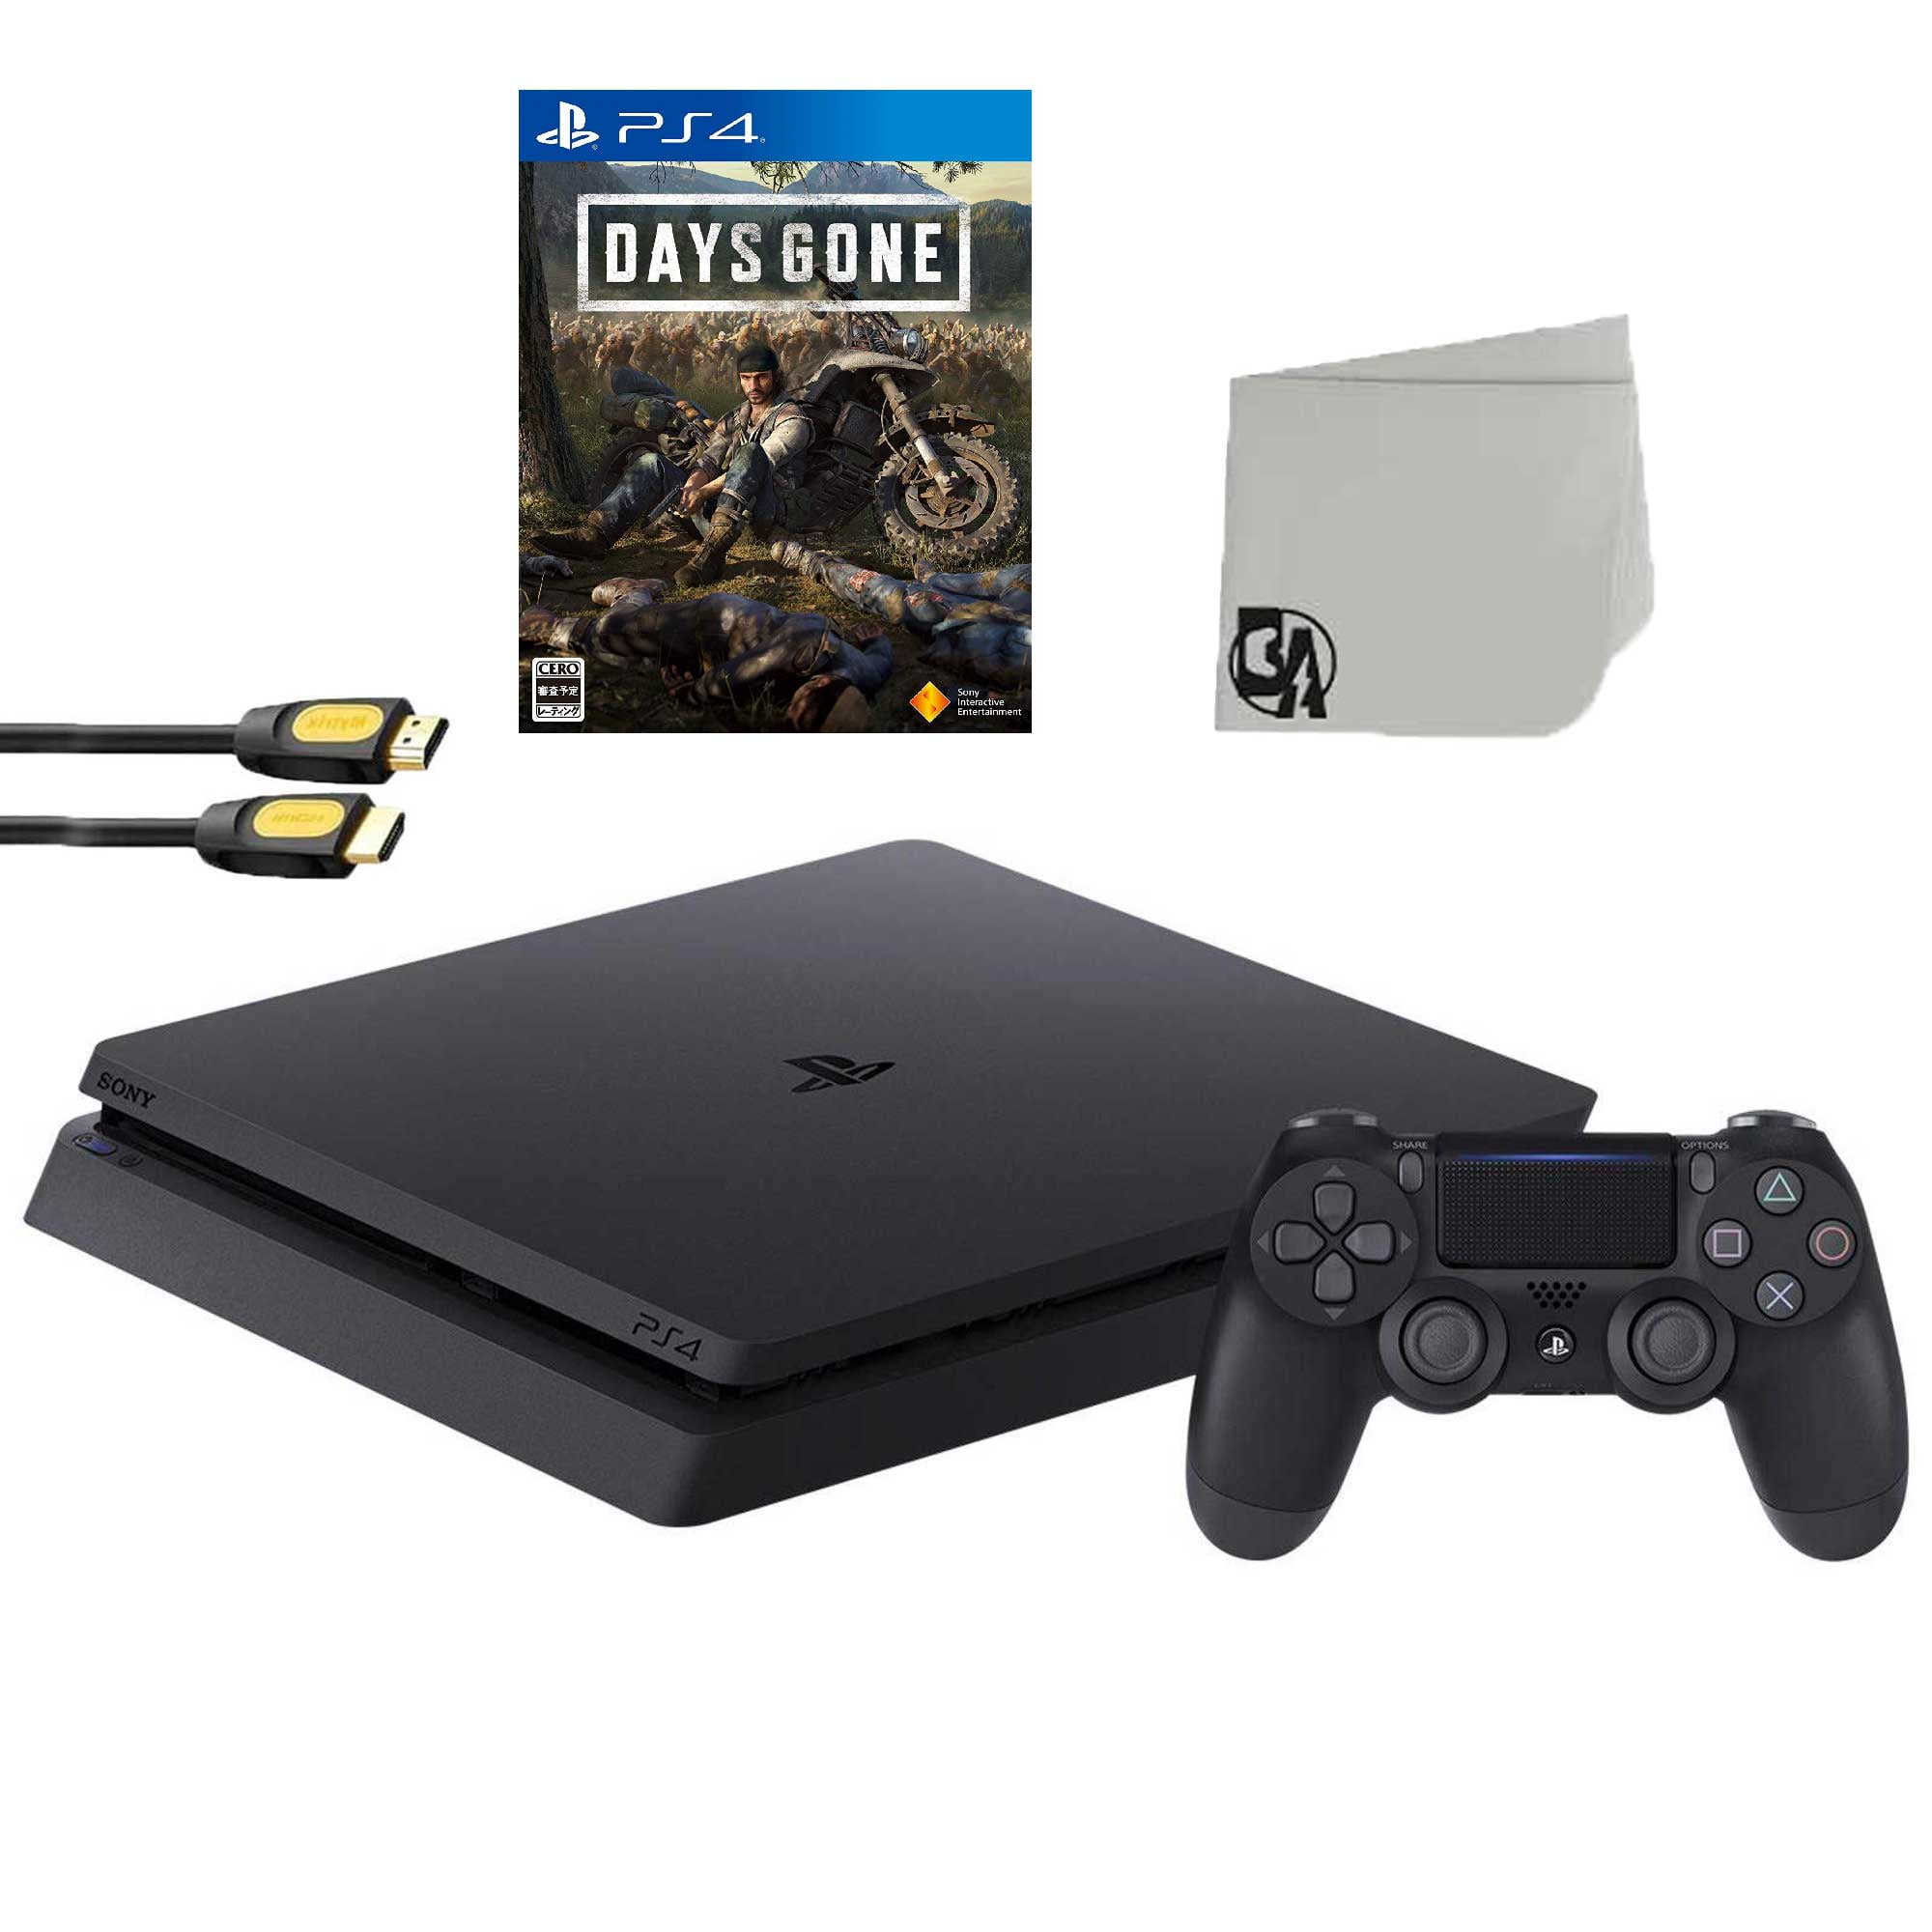 Sony 2215A PlayStation 4 Slim 500GB Gaming Console Black 2 Controller  Included with Days Gone Game BOLT AXTION Bundle Like New 